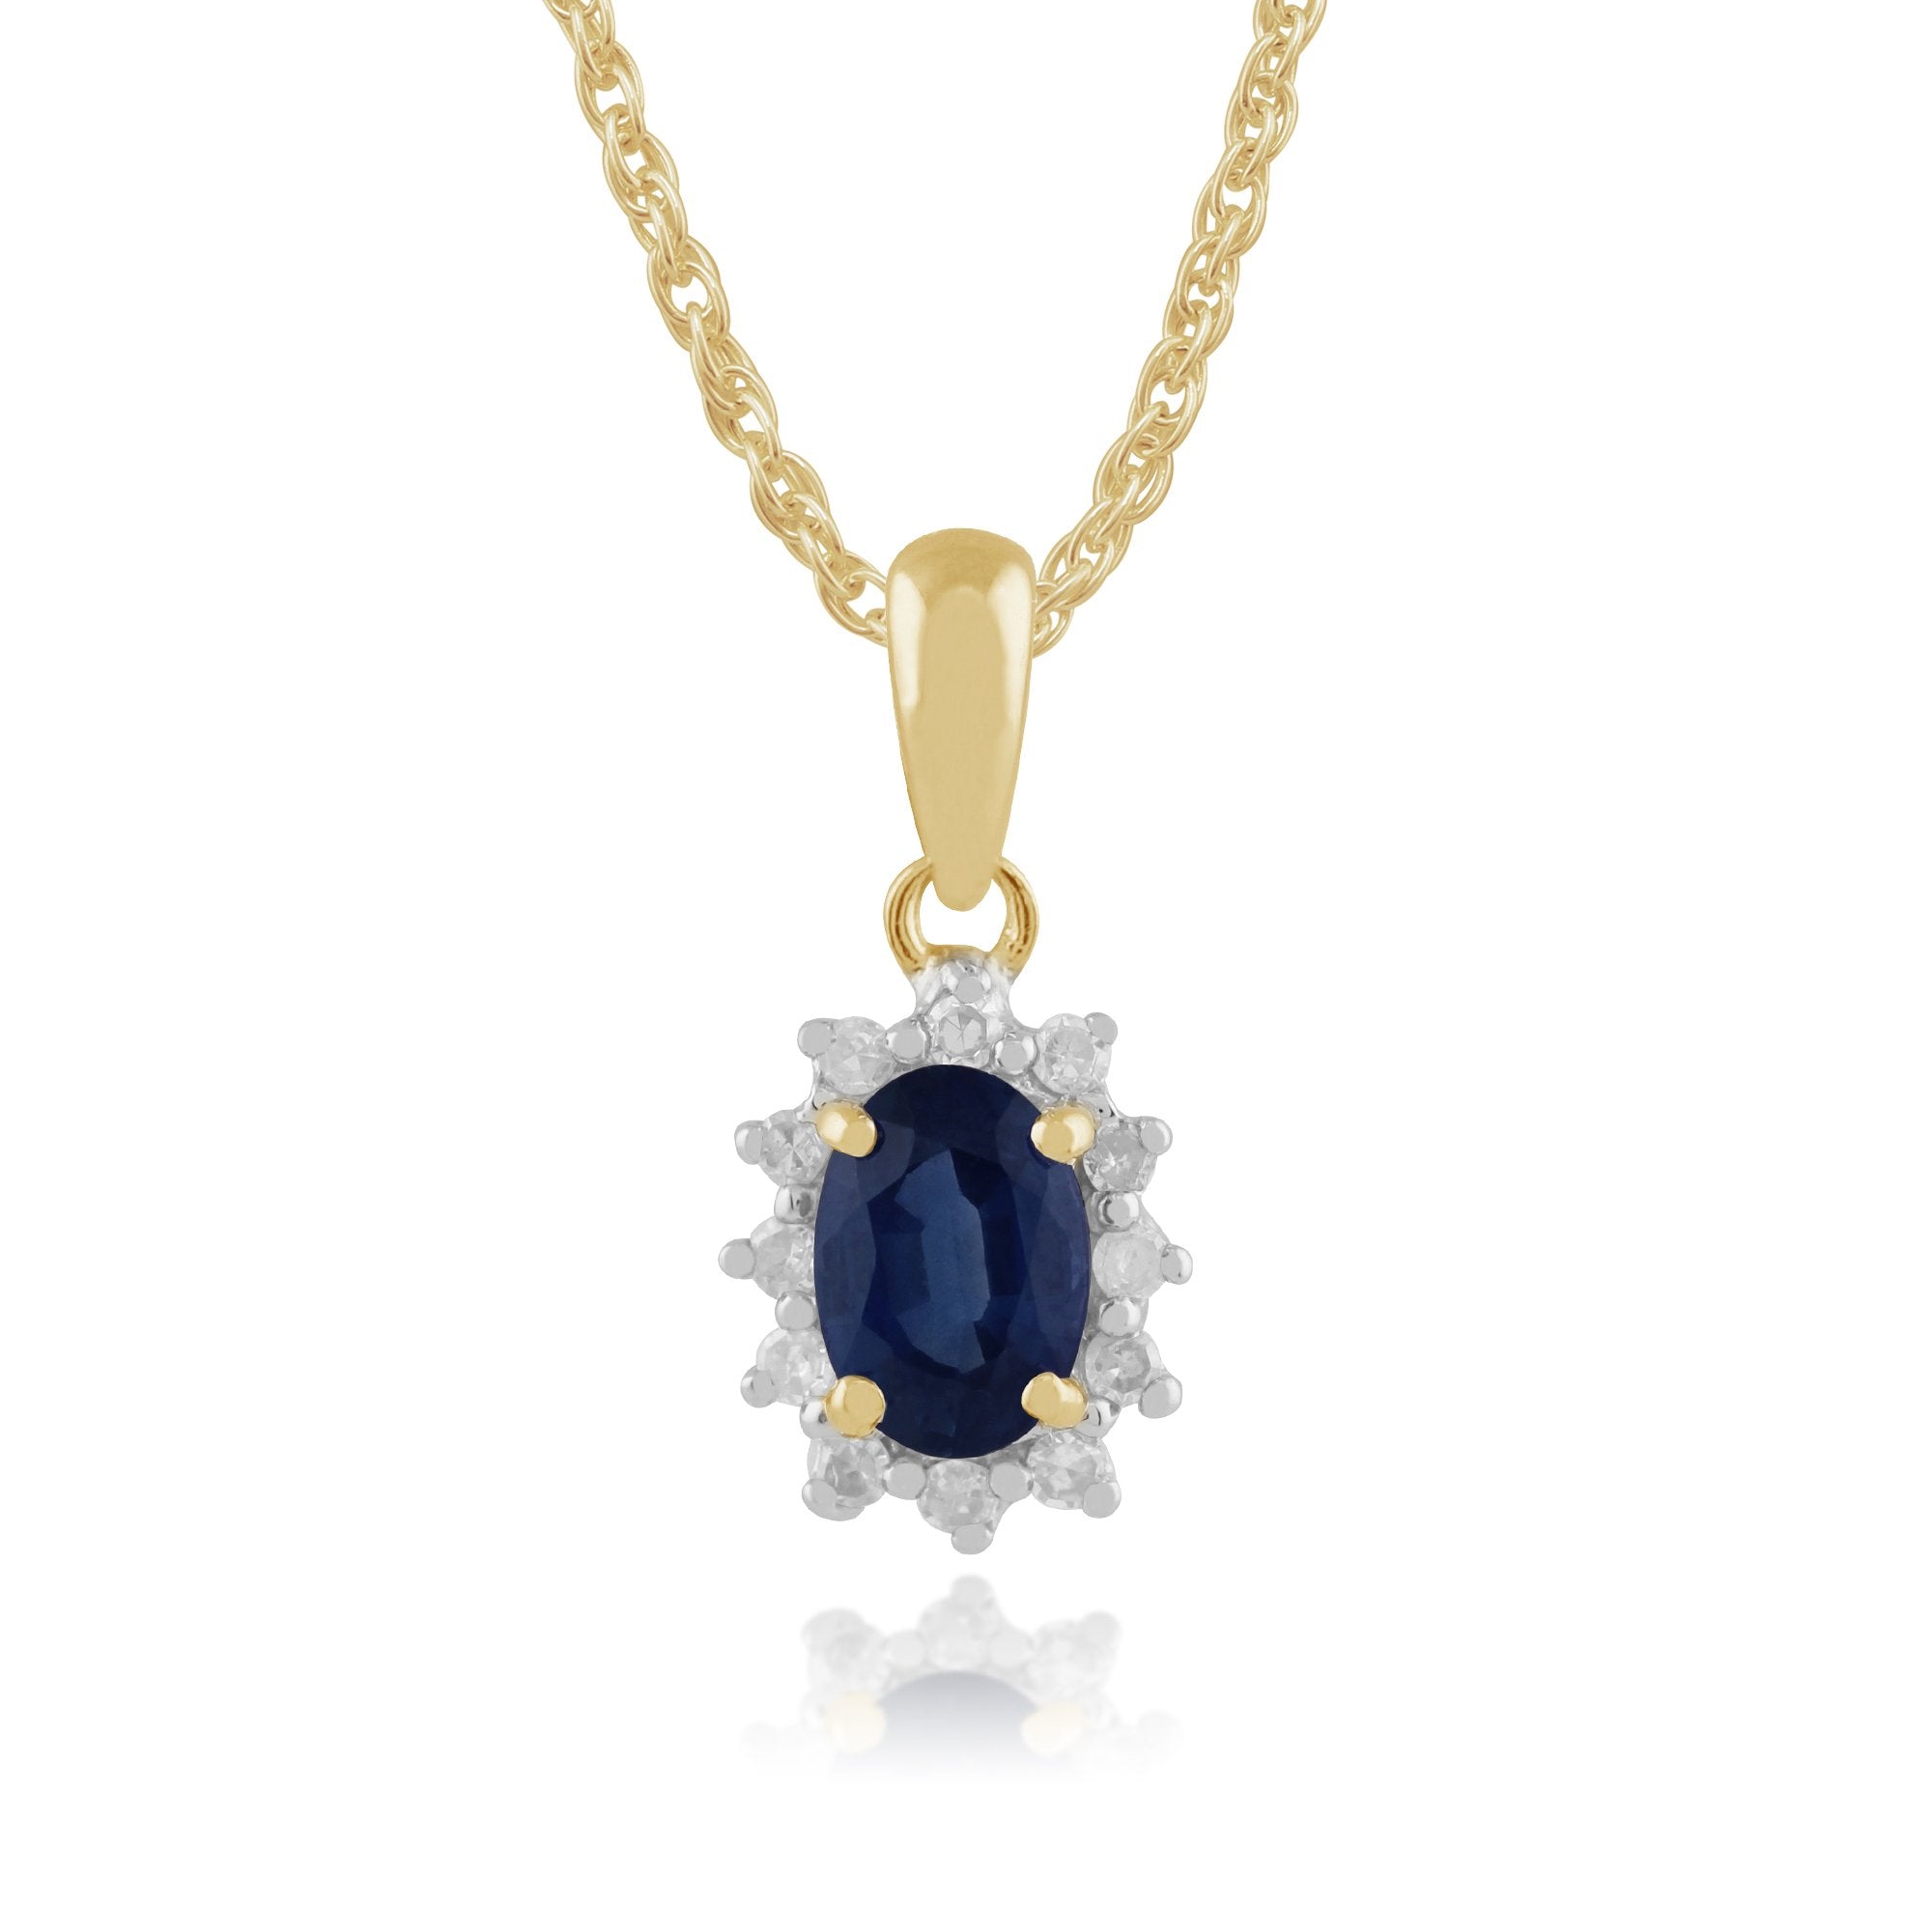 Classic Oval Sapphire & Diamond Cluster Pendant in 9ct Yellow Gold